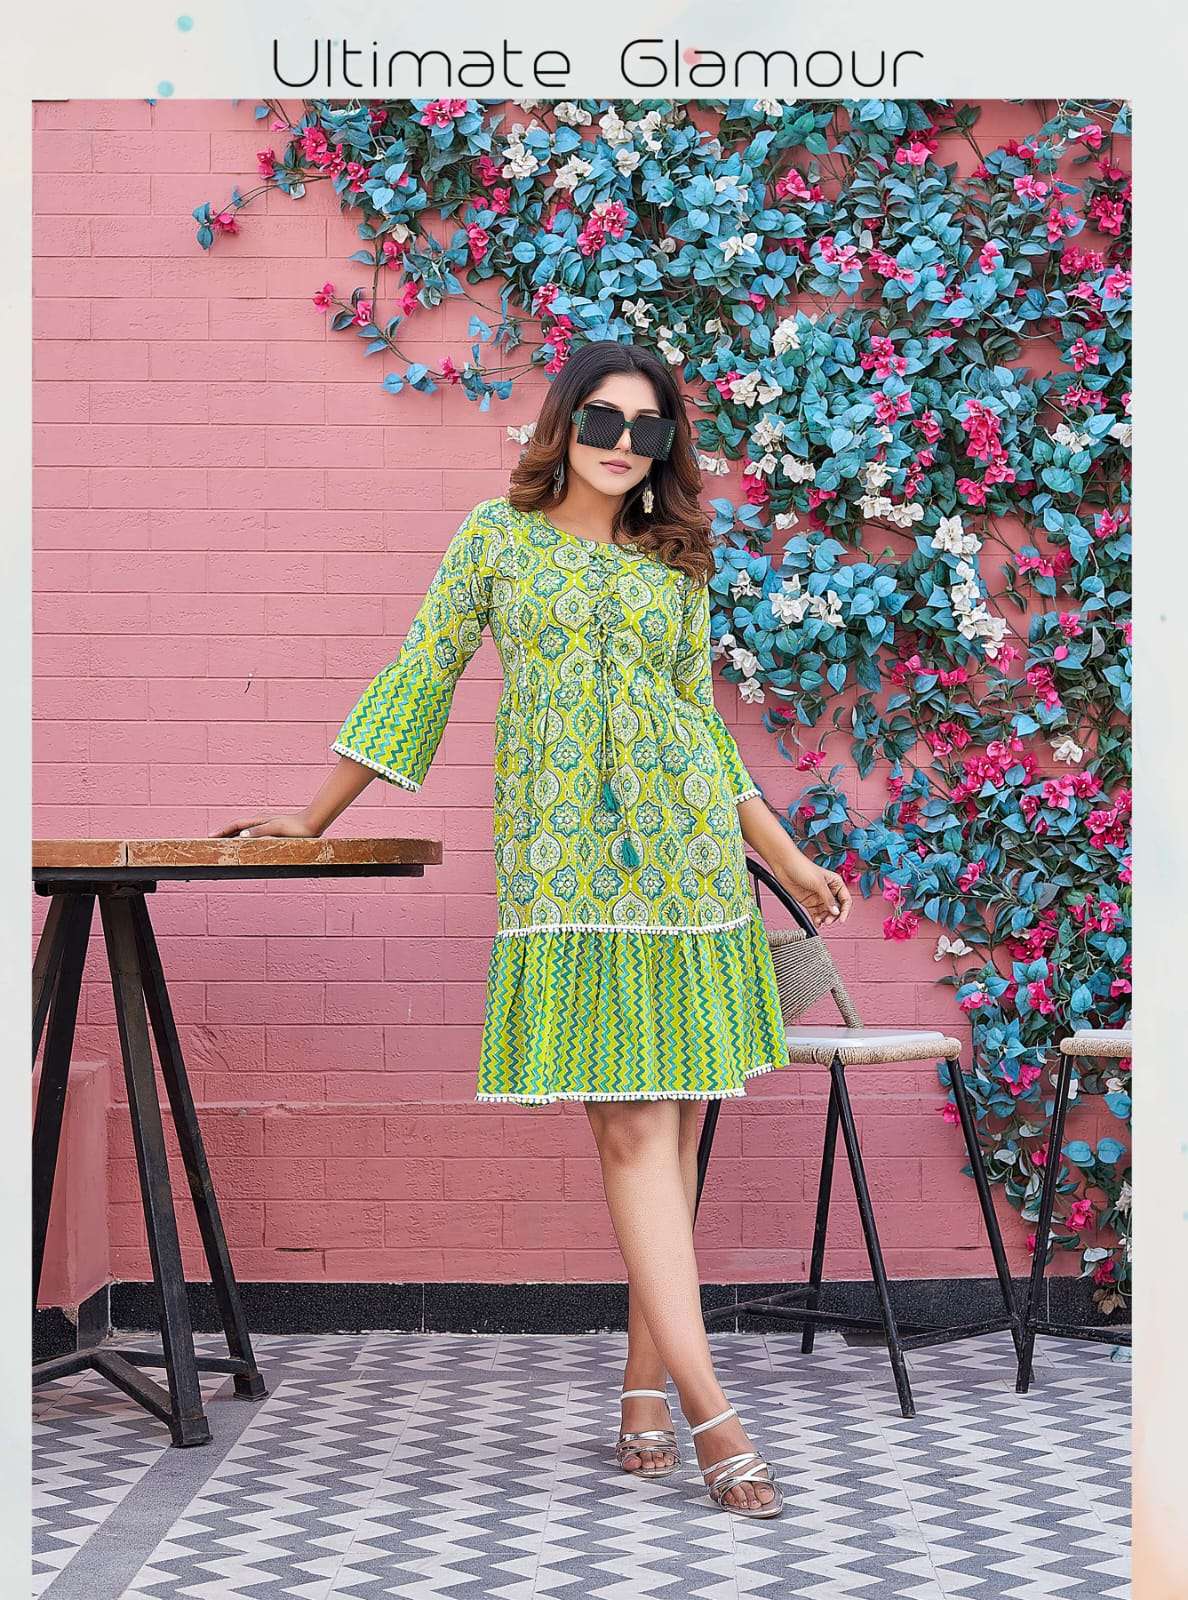 tips and tops fusion fancy look designer shorts kurtis latest catalogue collection surat 